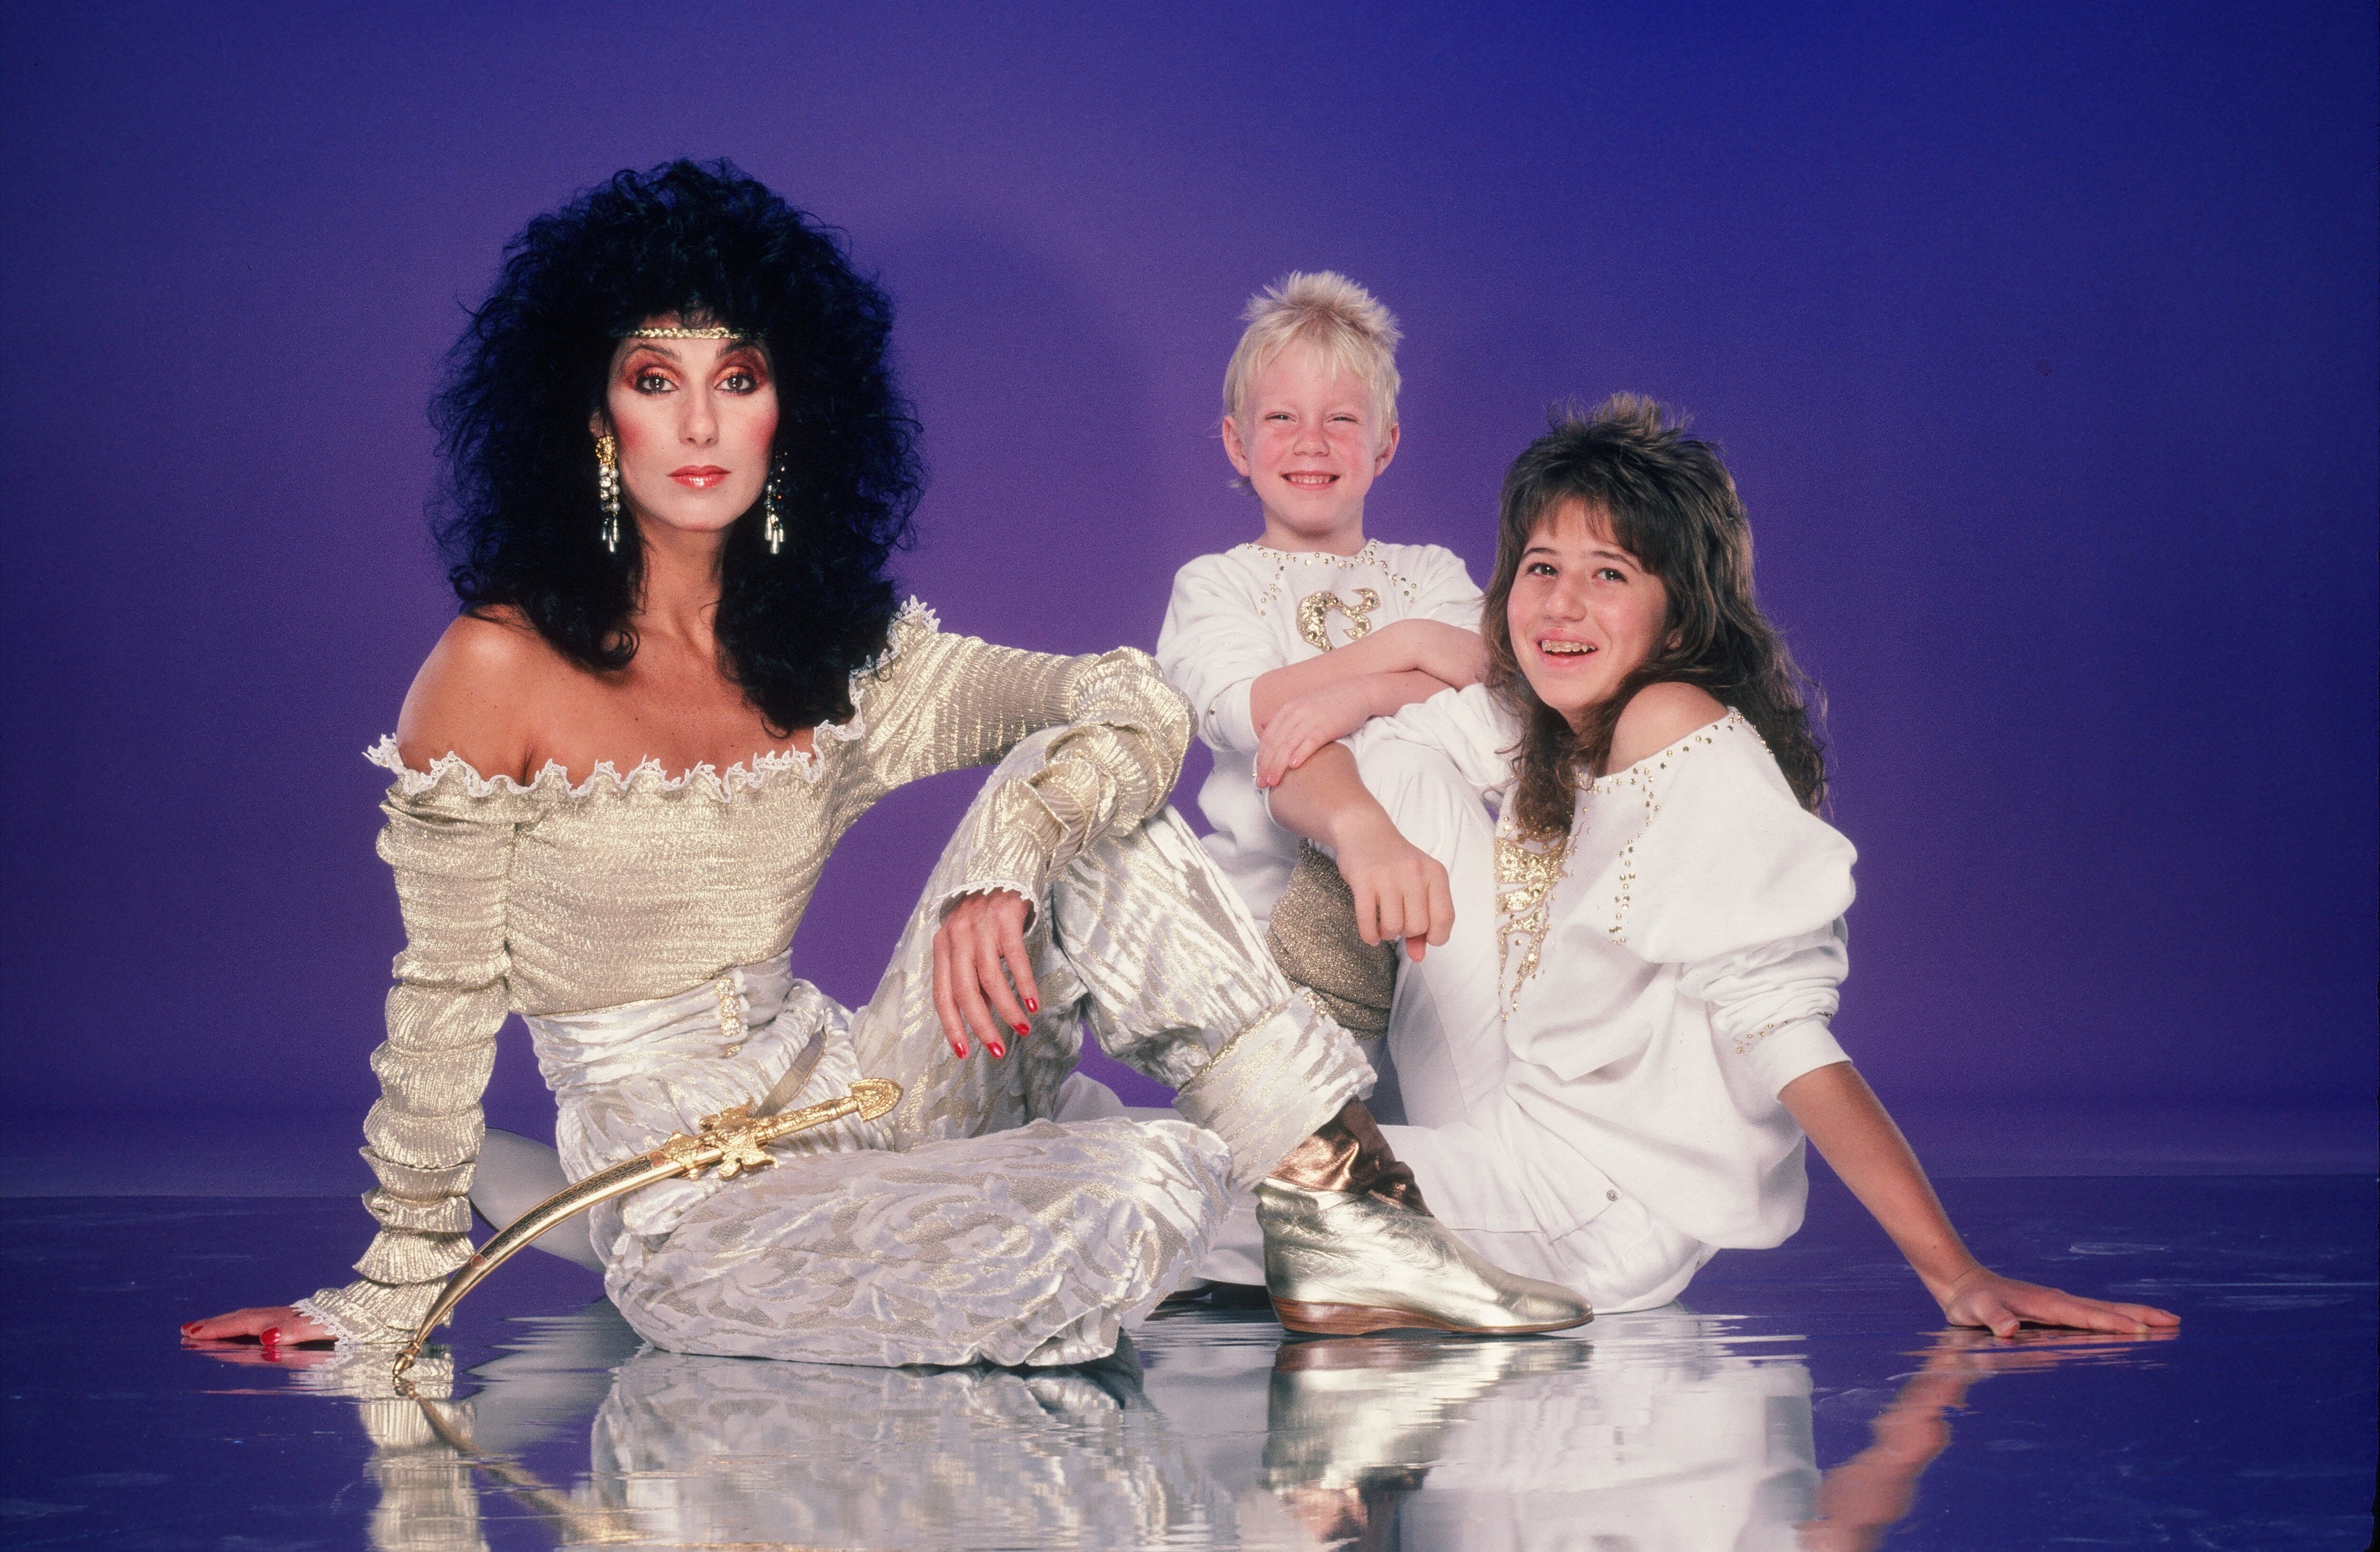 Cher, Chastity Bono (Chaz Bono) and Elijah Blue Allman in 1981 in Los Angeles, California | Source: Getty Images